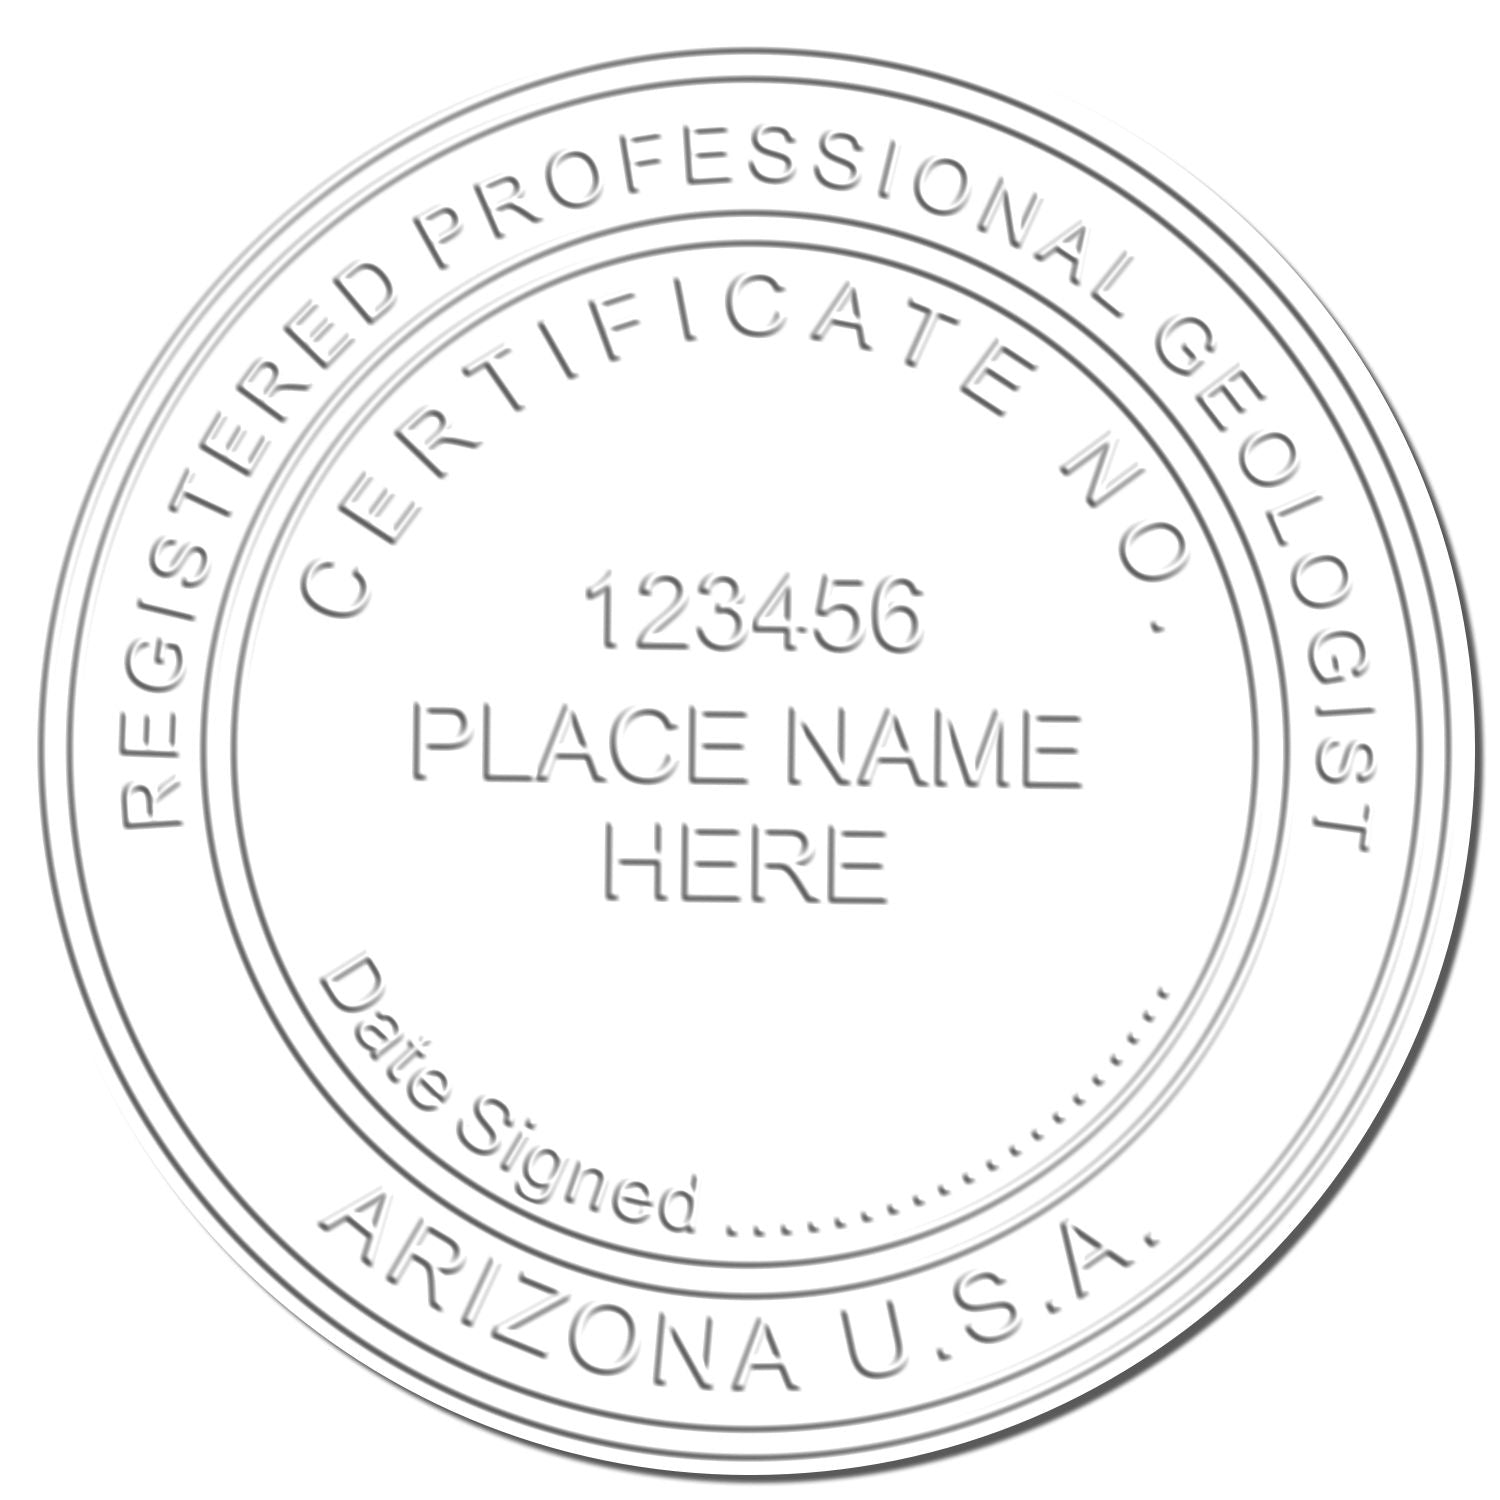 The main image for the Arizona Geologist Desk Seal depicting a sample of the imprint and imprint sample